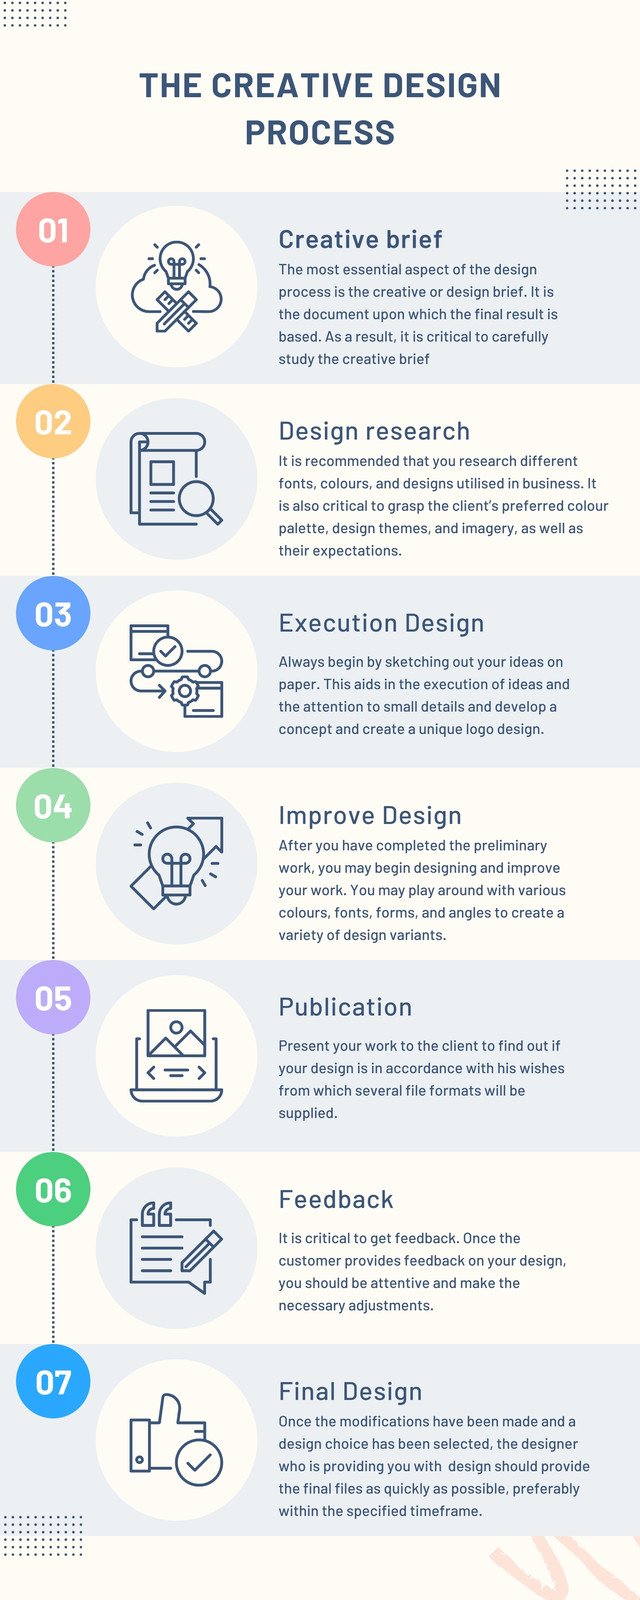 infographic process